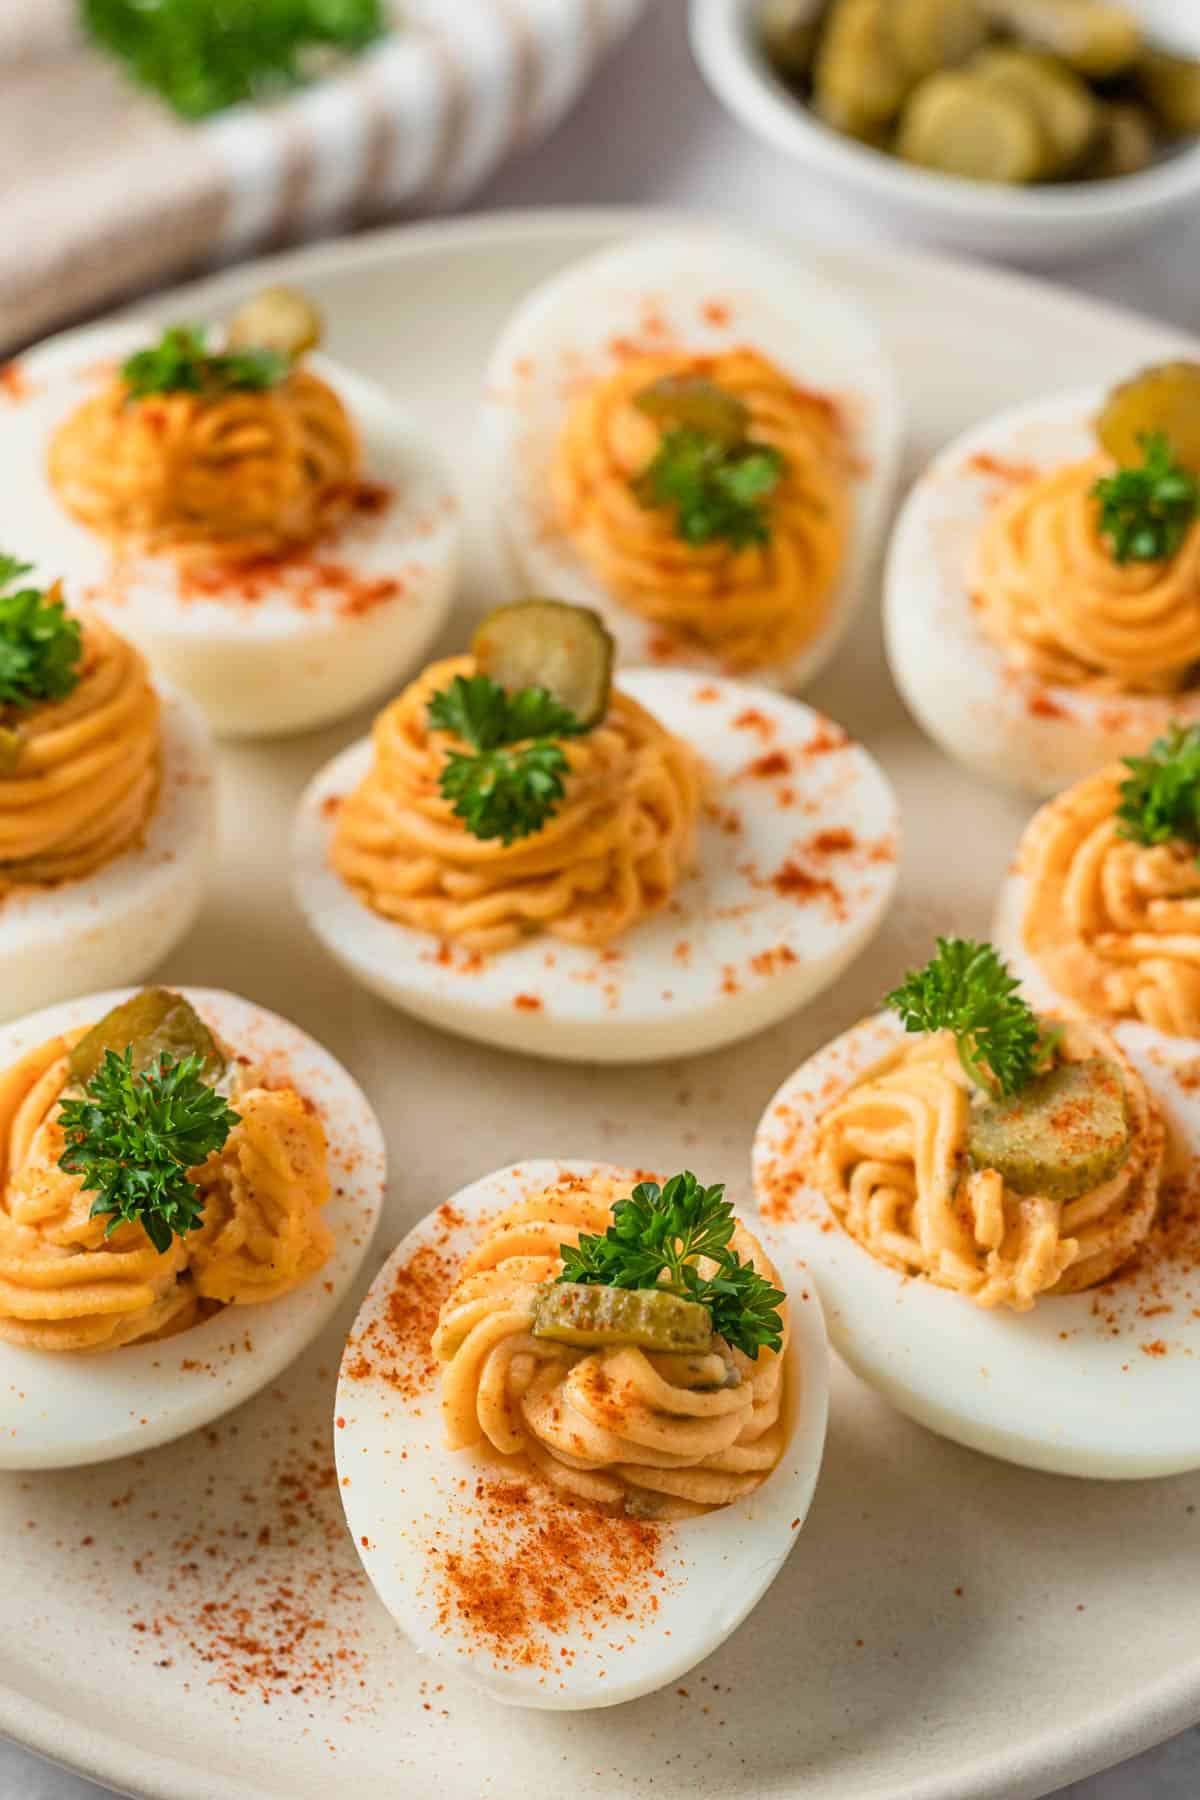 spicy deviled eggs with pickles hot sauce and paprika